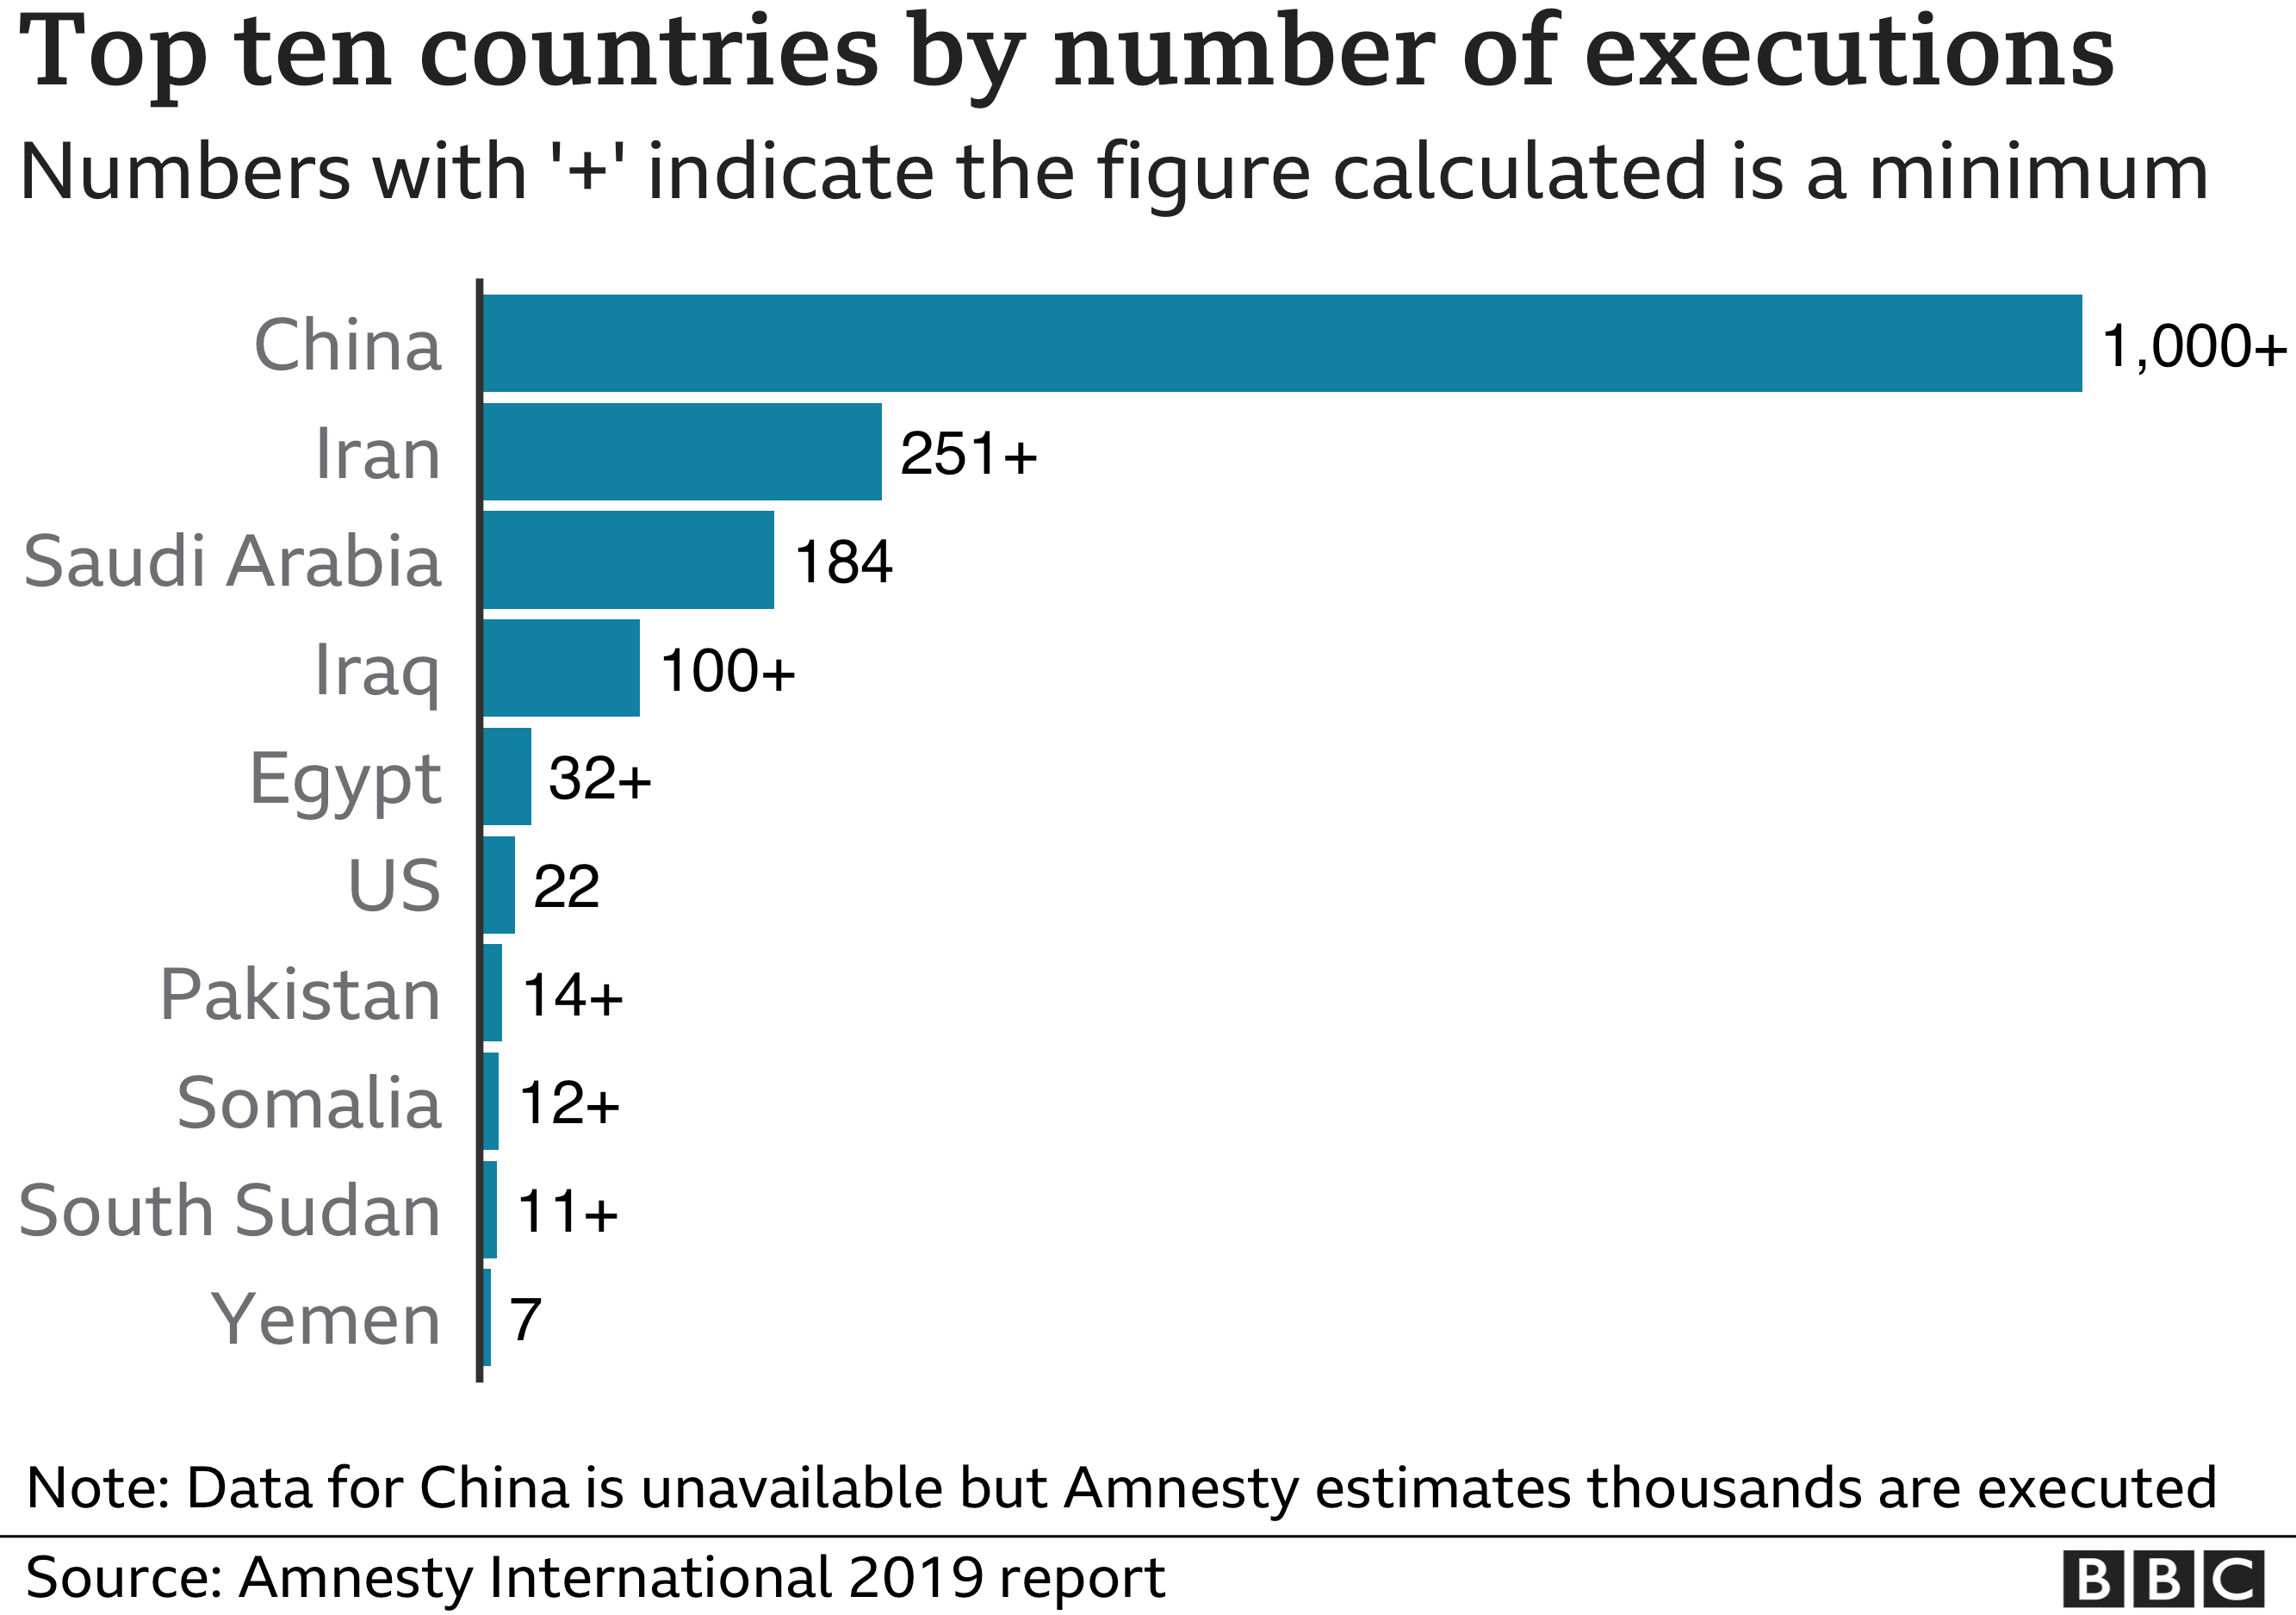 Death penalty: How many countries still have it? - BBC News